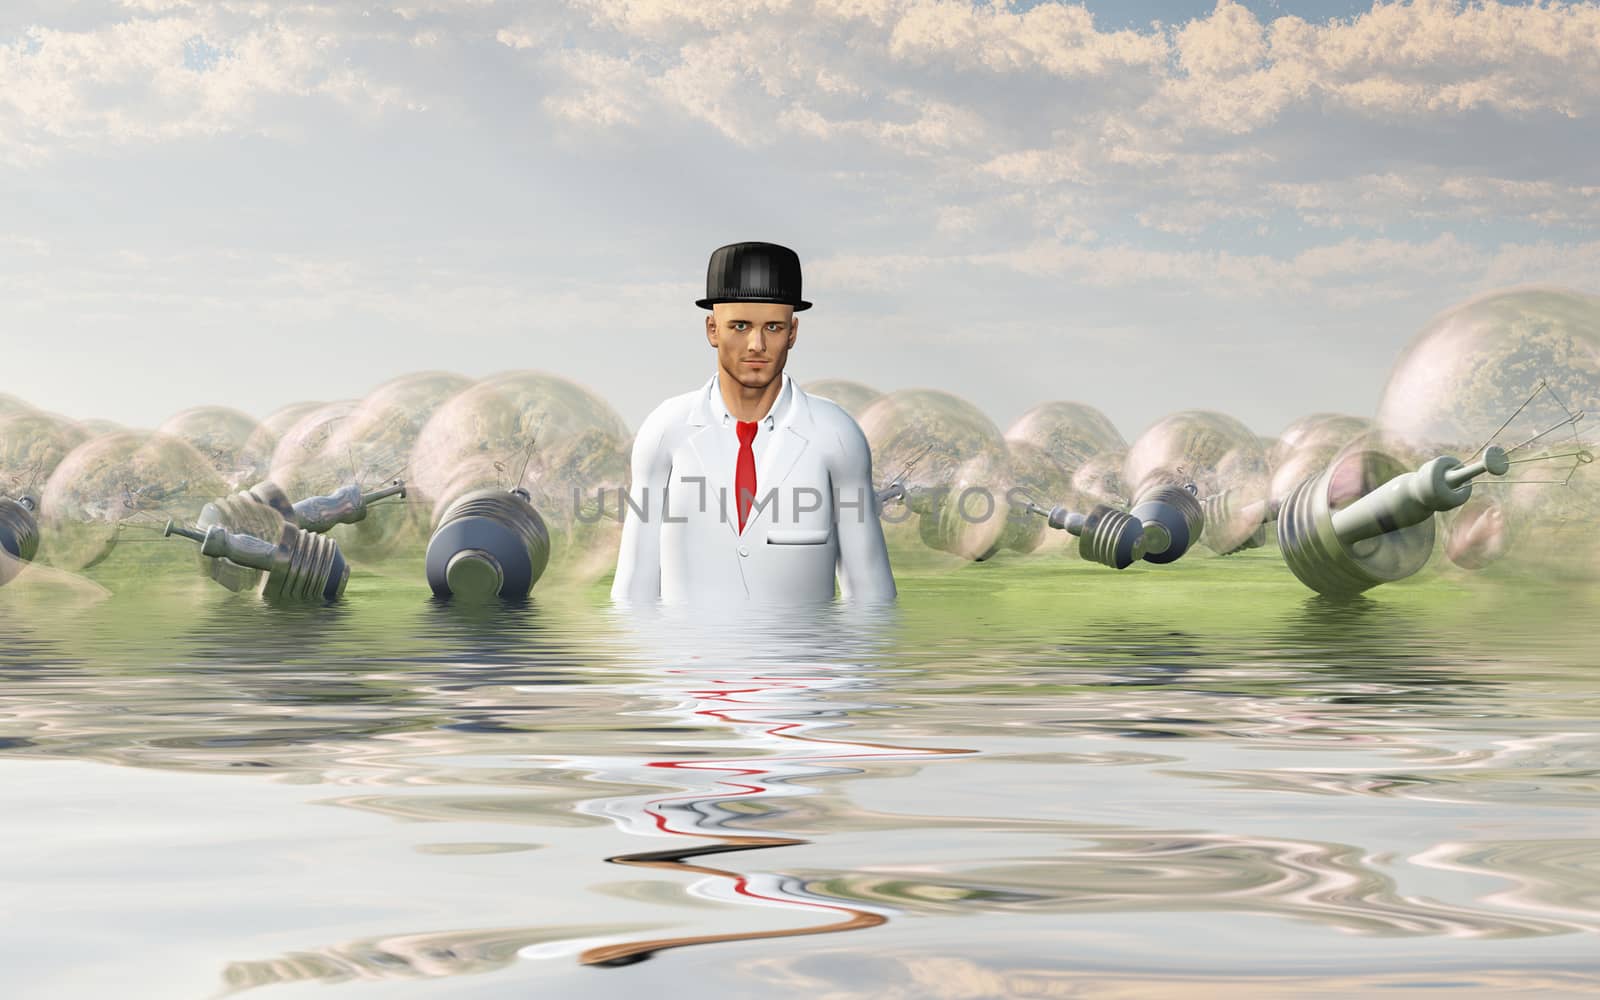 Man with large ideas surrounding him in the form of classic lightbulbs in flooded landscape